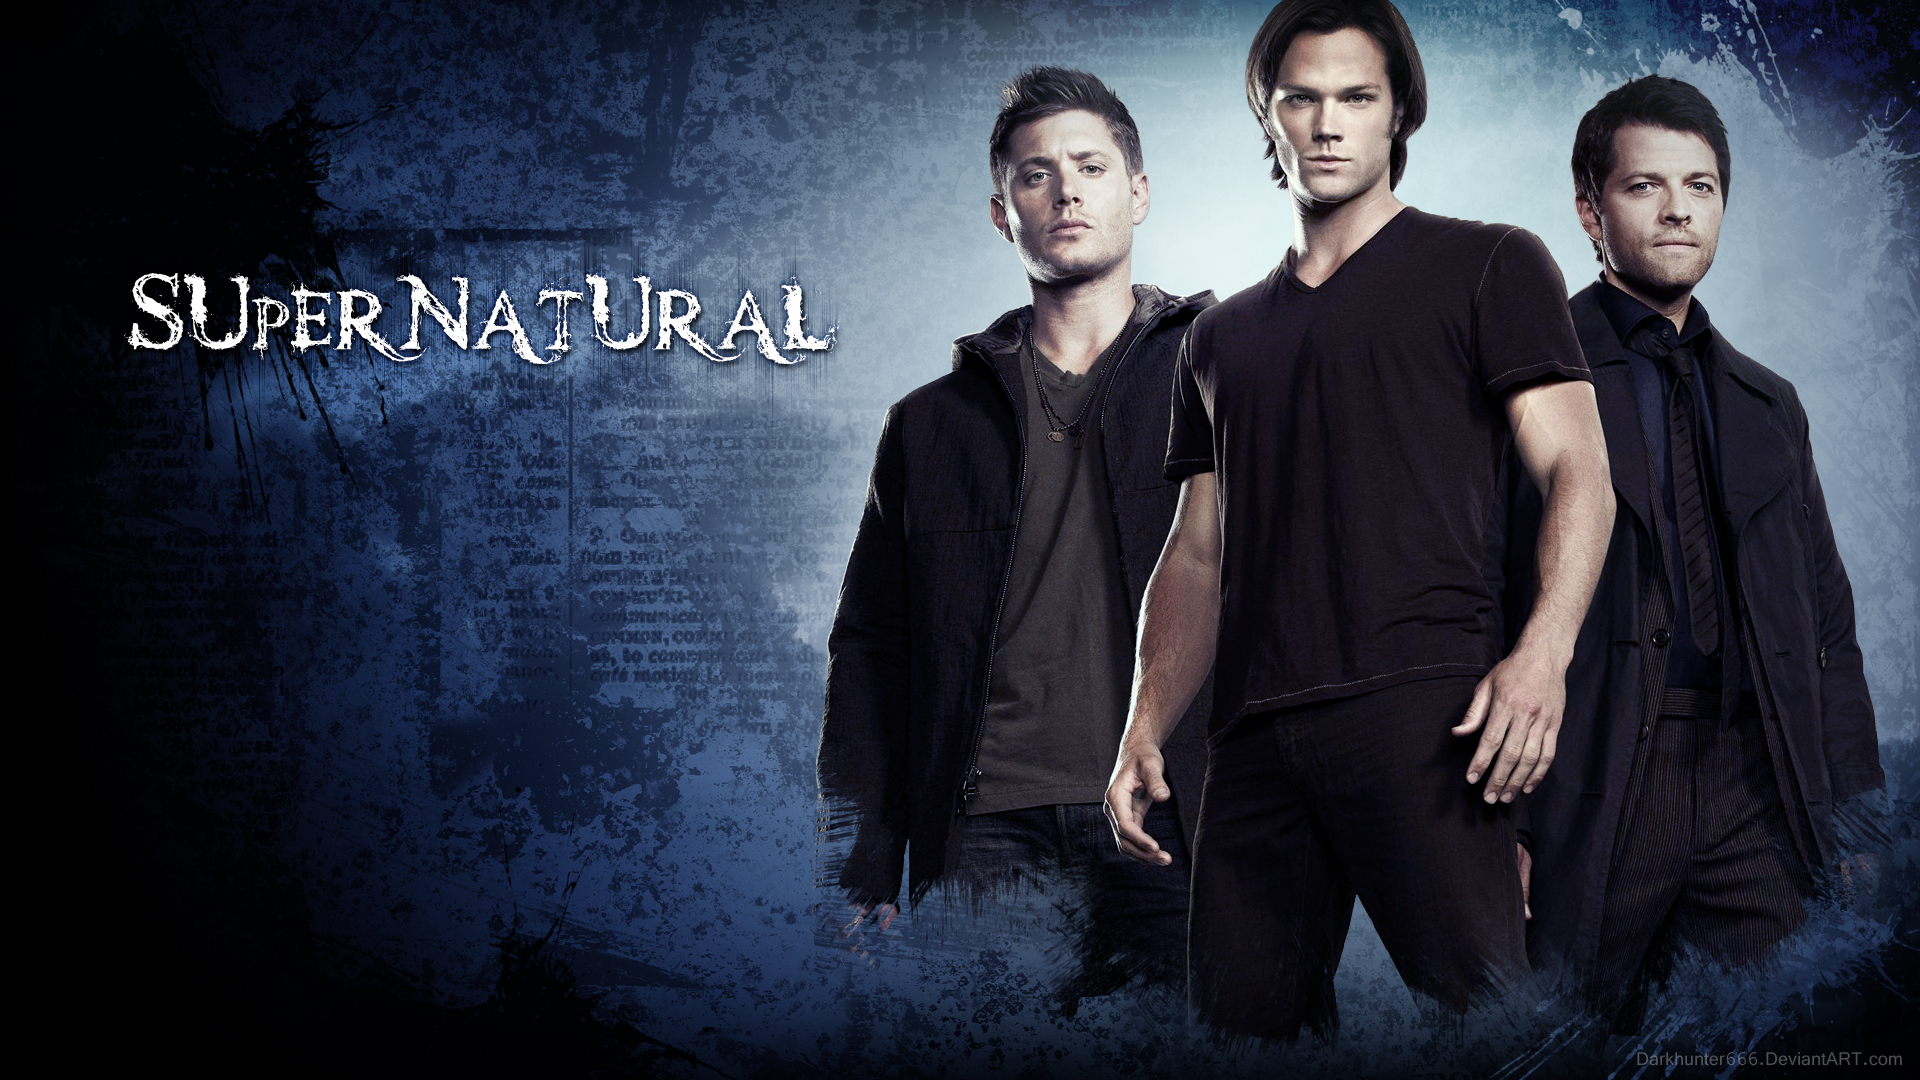 Supernatural Wallpaper High Resolution and Quality Download